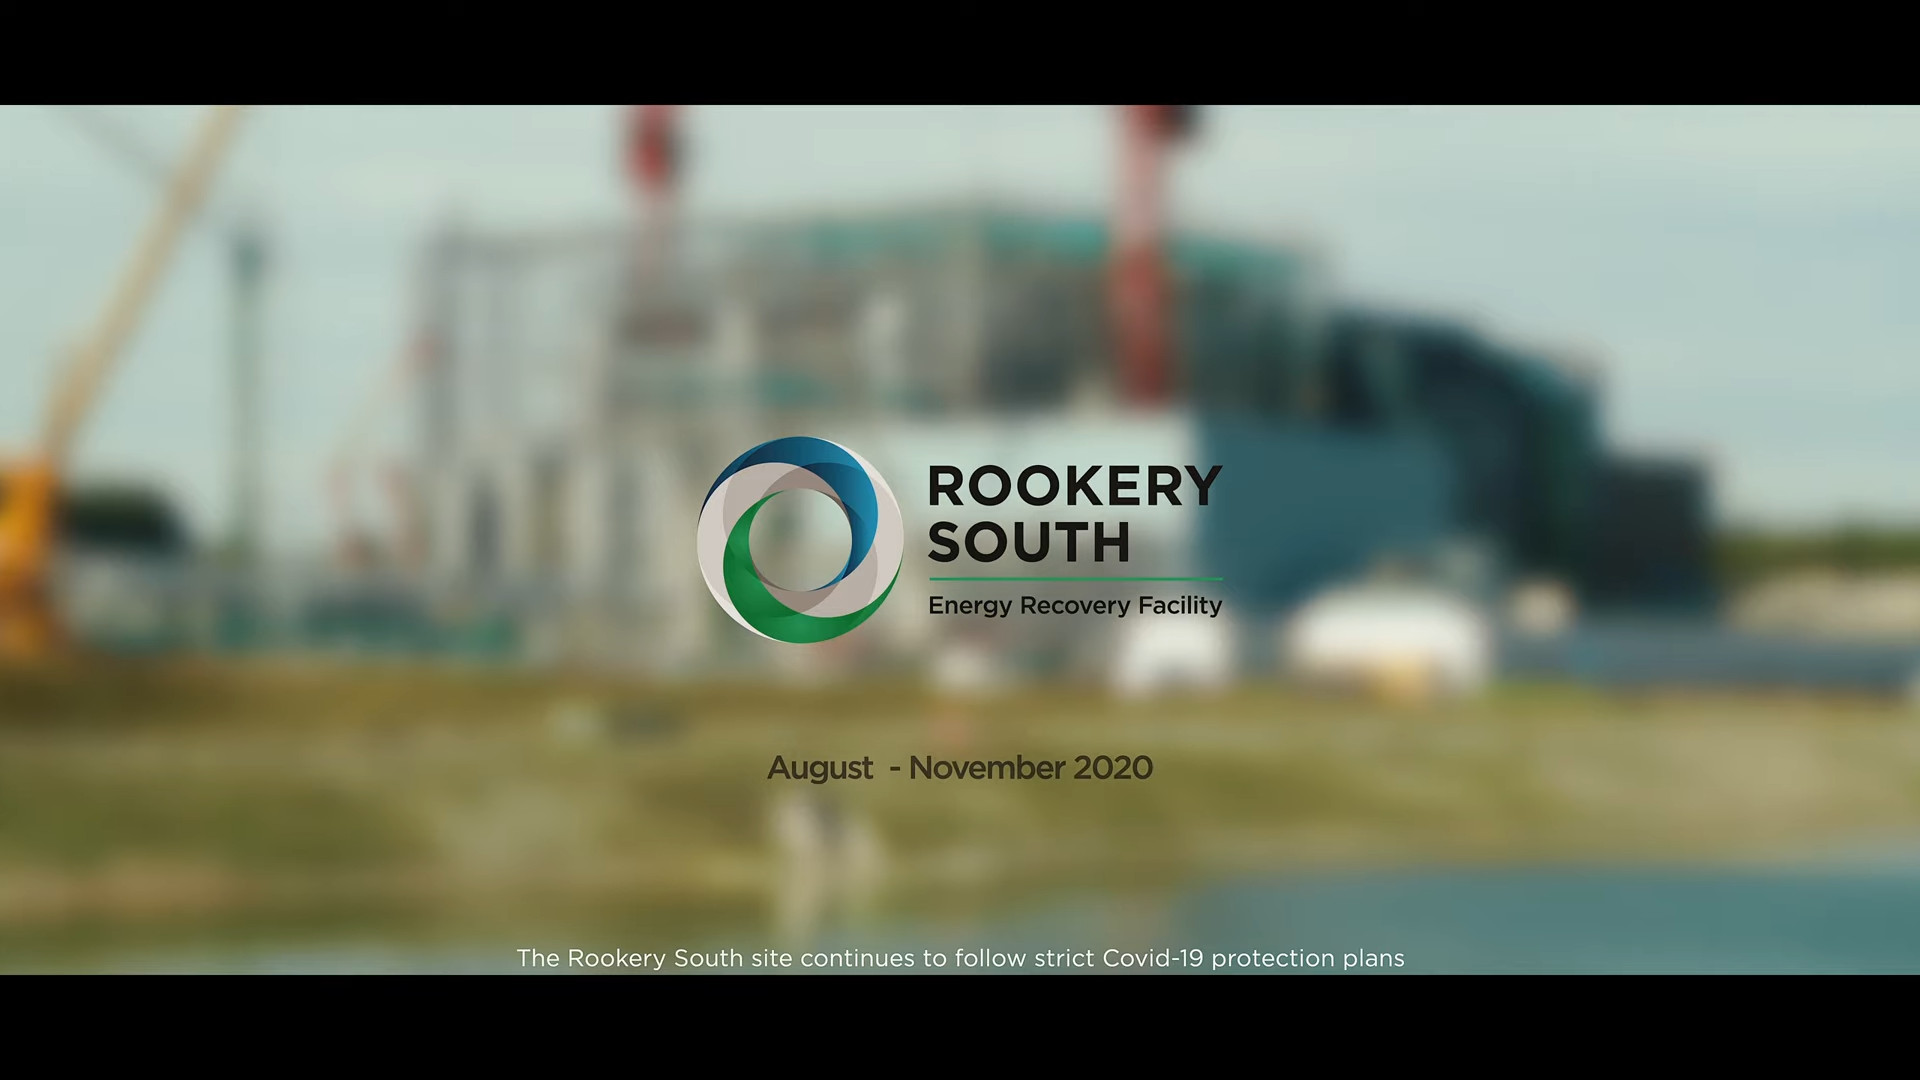 Rookery South Energy Recovery Facility in Bedford, Großbritannien